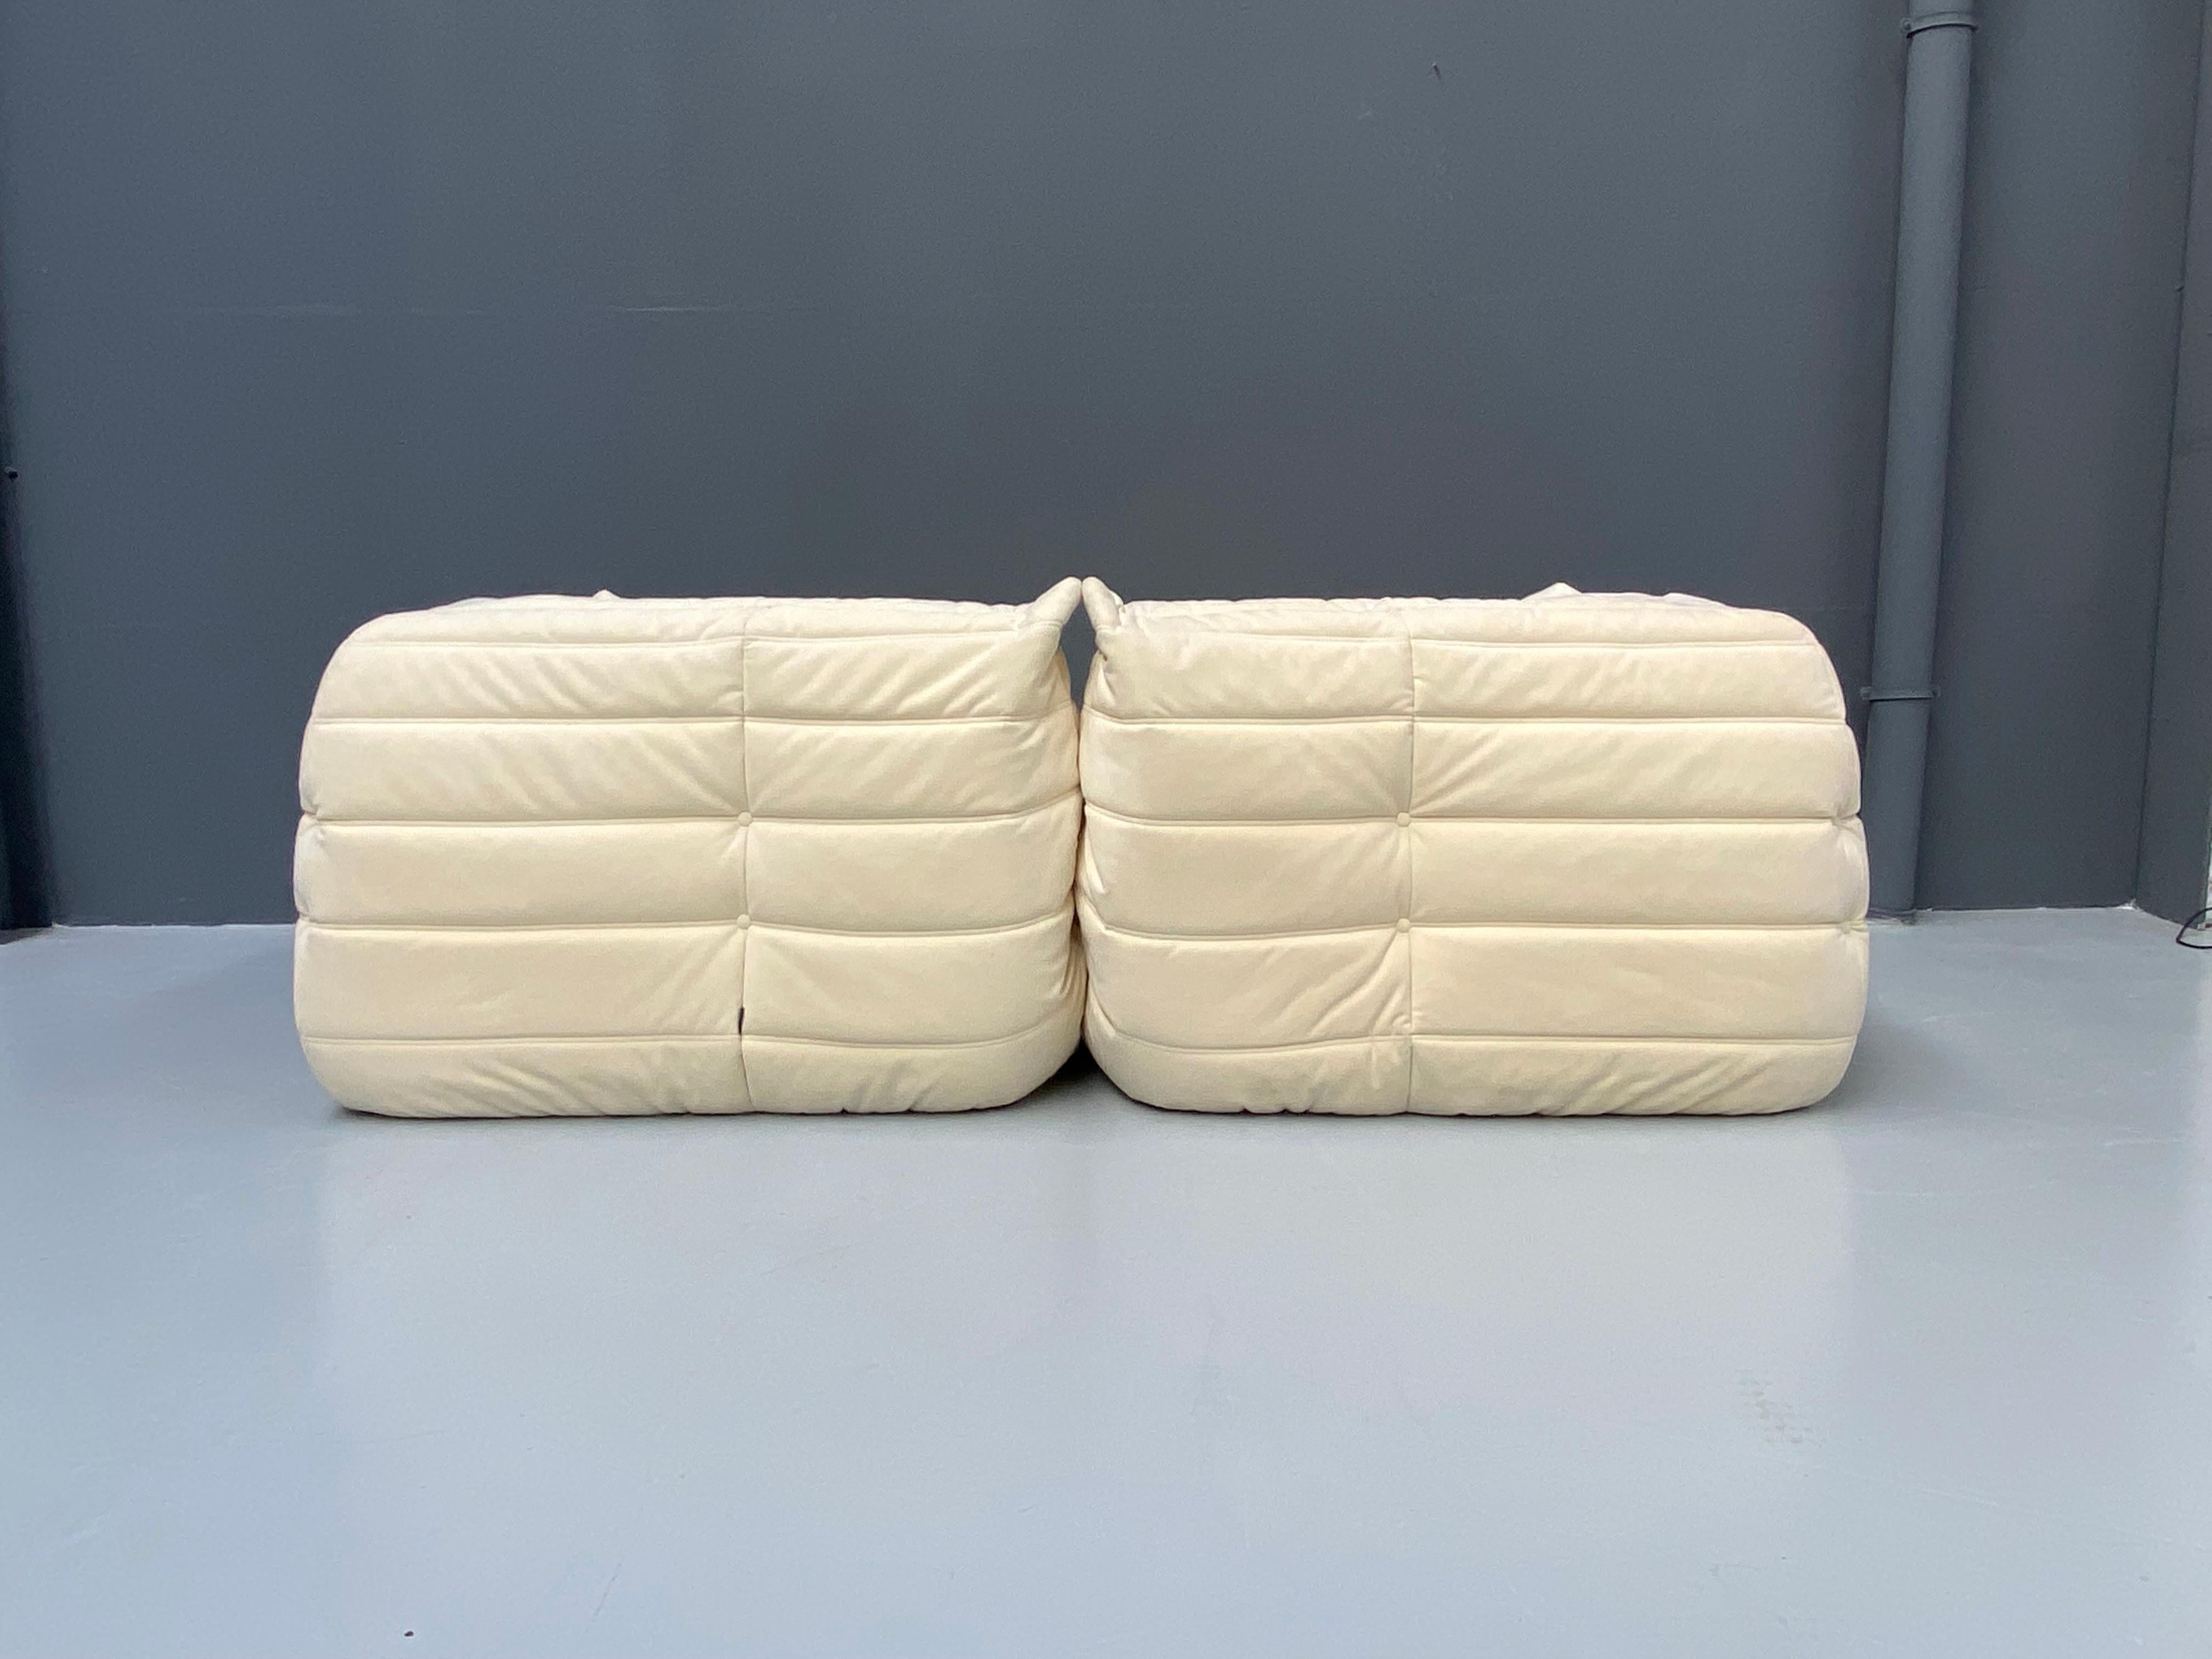 French Togo Arm Chairs in Alcantara Eggshell by Michel Ducaroy for Ligne Roset. 1